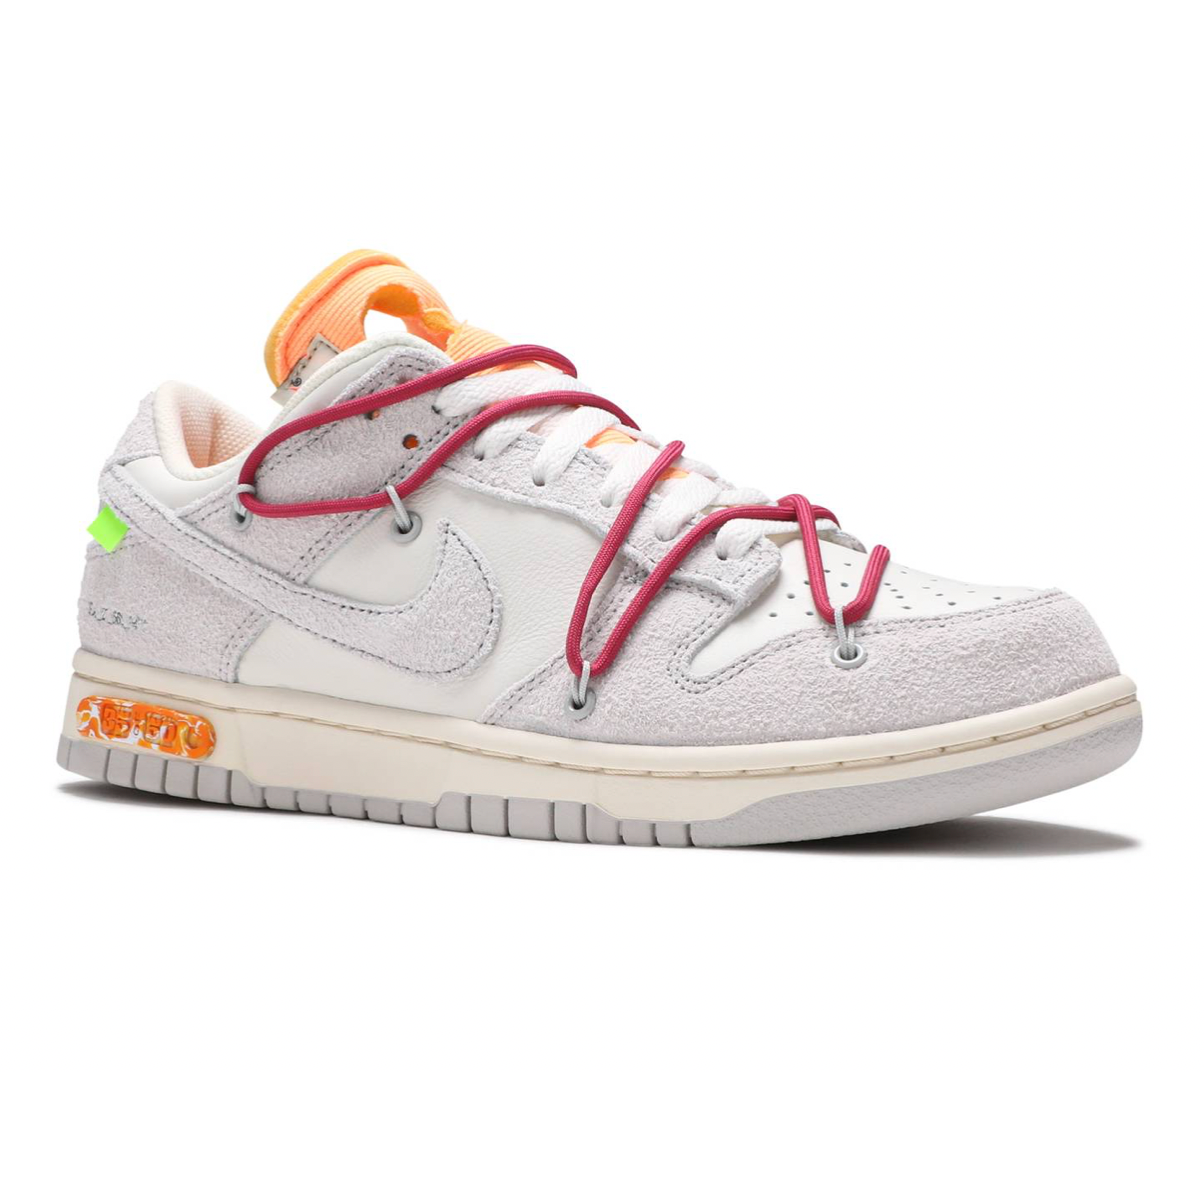 Nike Dunk Low Off-White Lot 35 from Nike